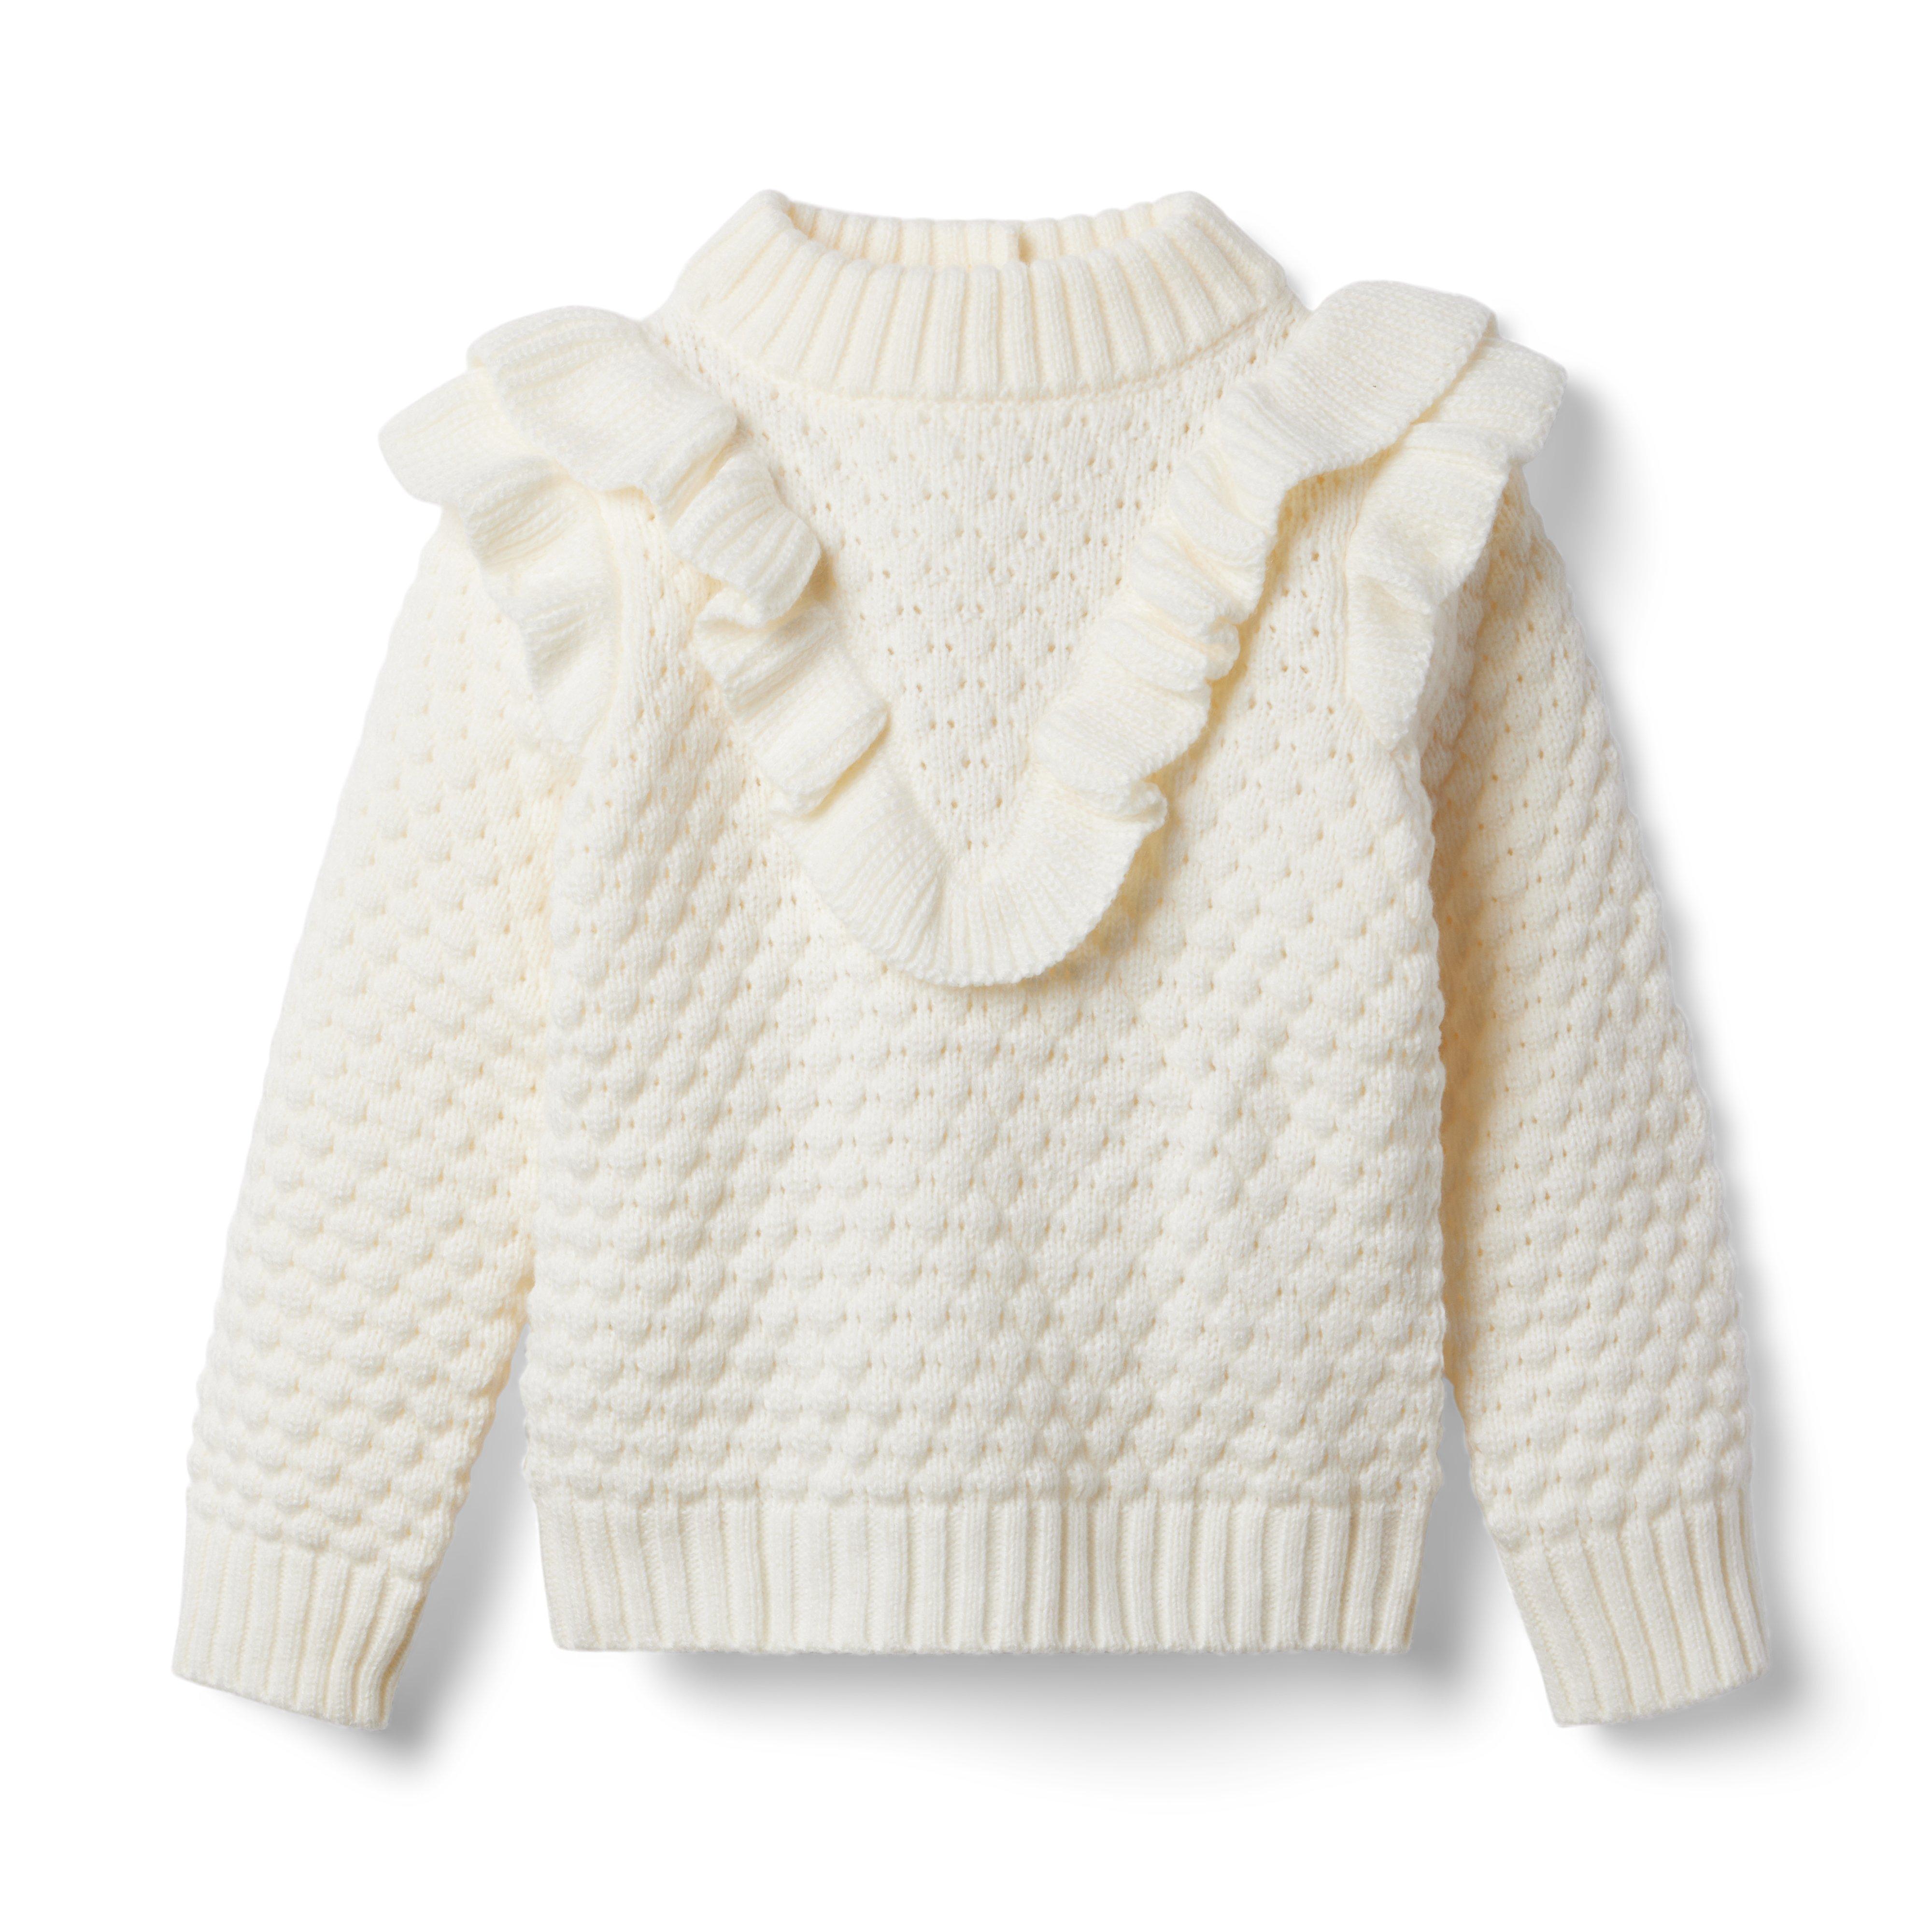 Girl Cream And Sugar Textured Ruffle Sweater by Janie and Jack